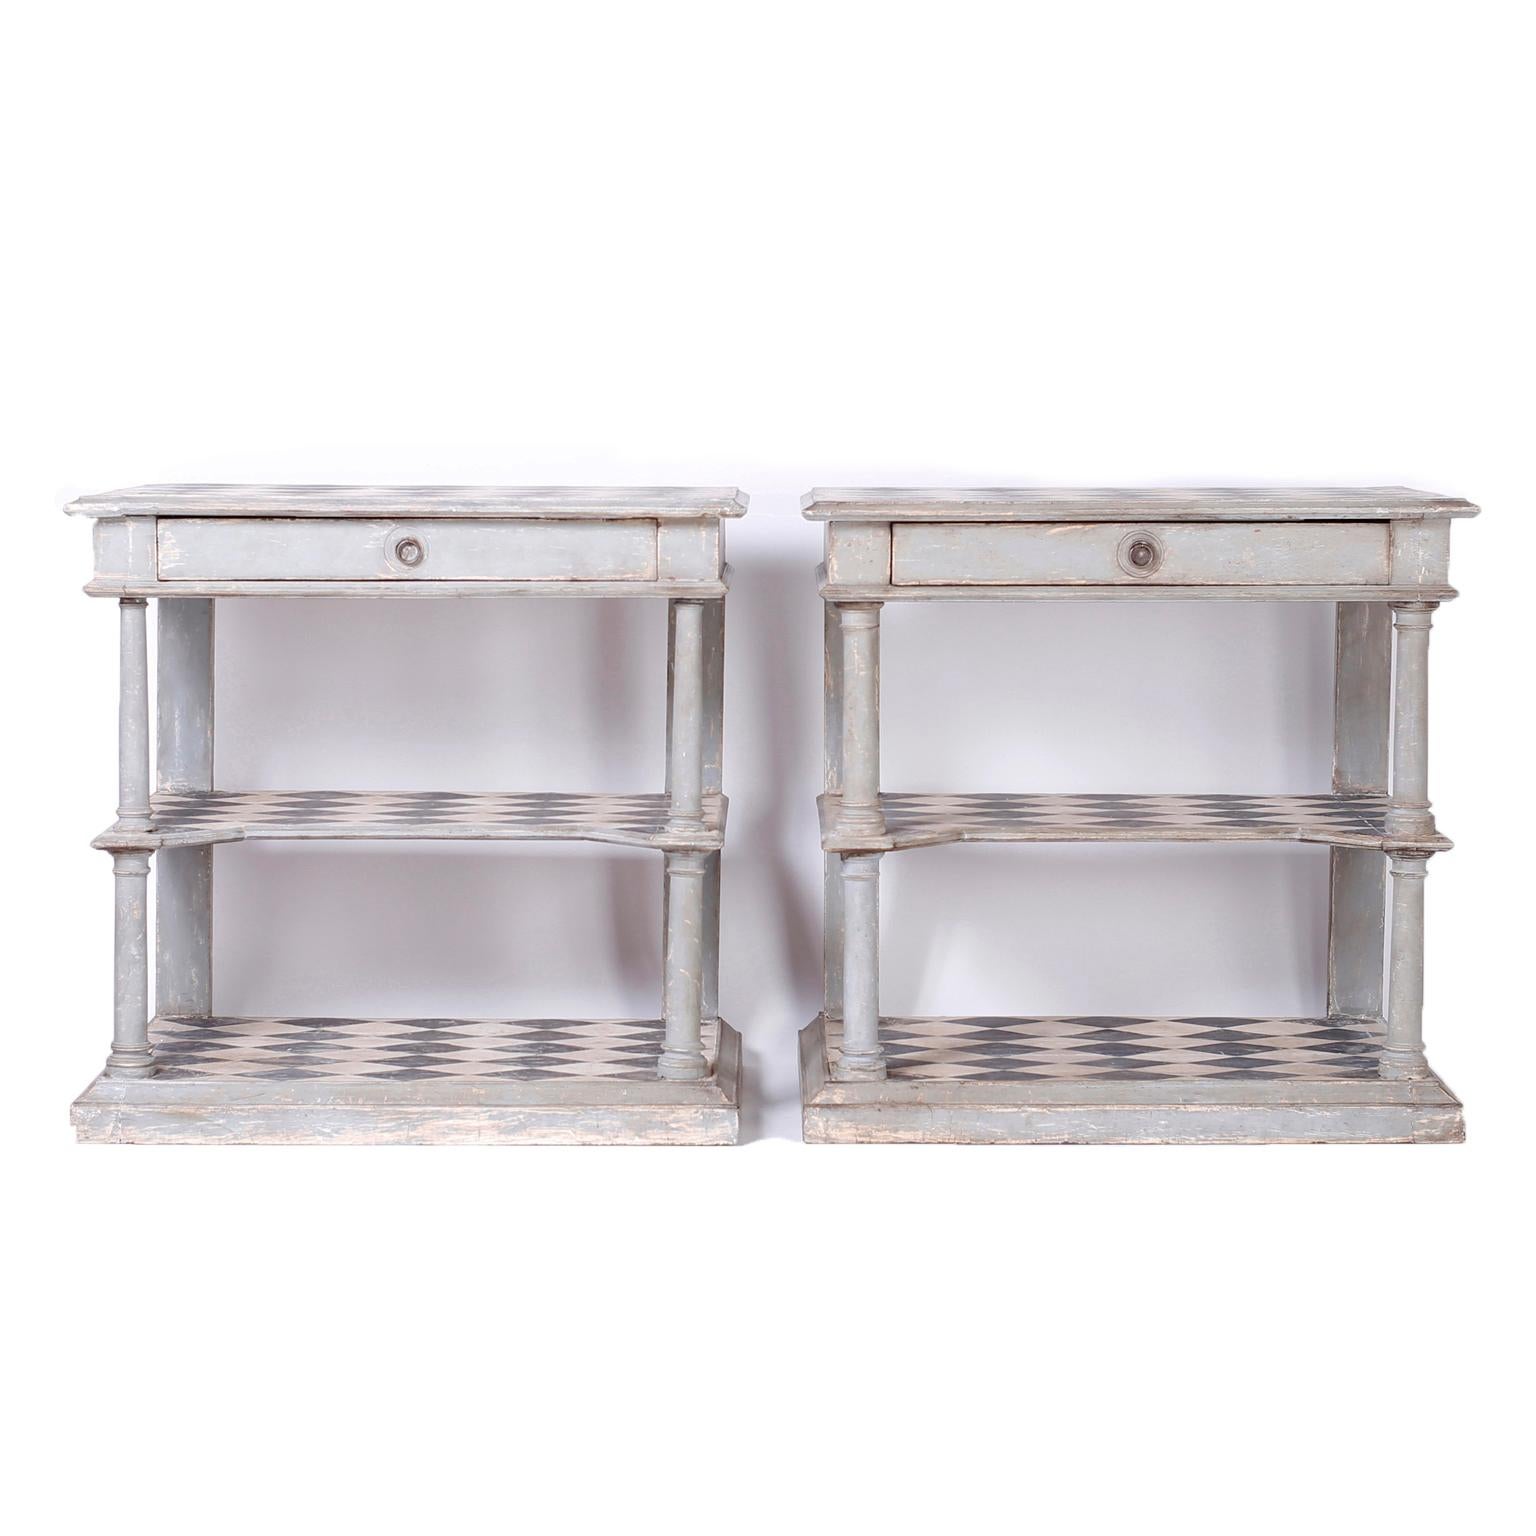 Pair of handmade antique Italian servers or consoles with three tiers decorated with harlequin designs on the tops. The cases with one drawer and turned supports are painted with Classic continental putty grey over gesso now aged to perfection.